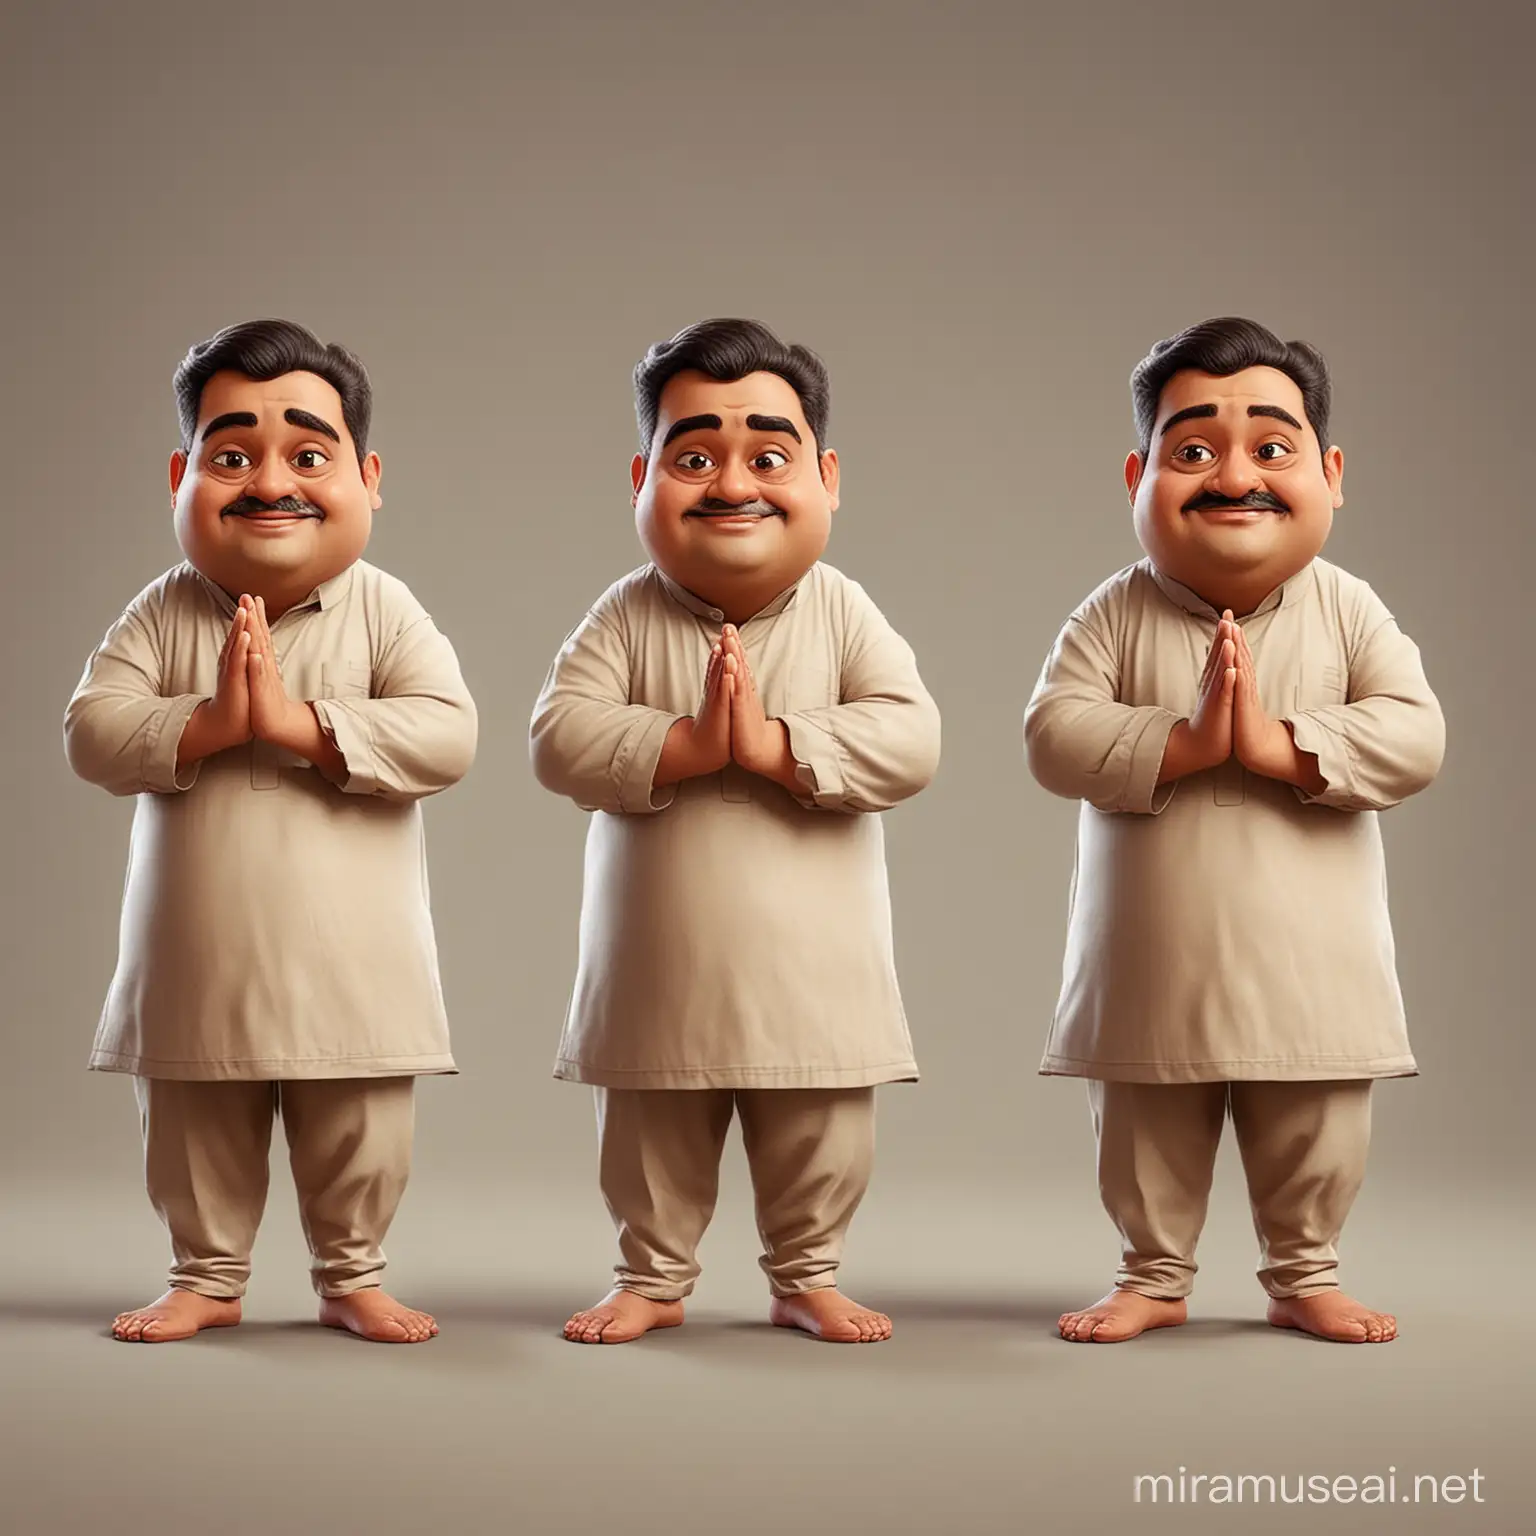 Cheerful Little Chubby Man in Traditional Indian Attire